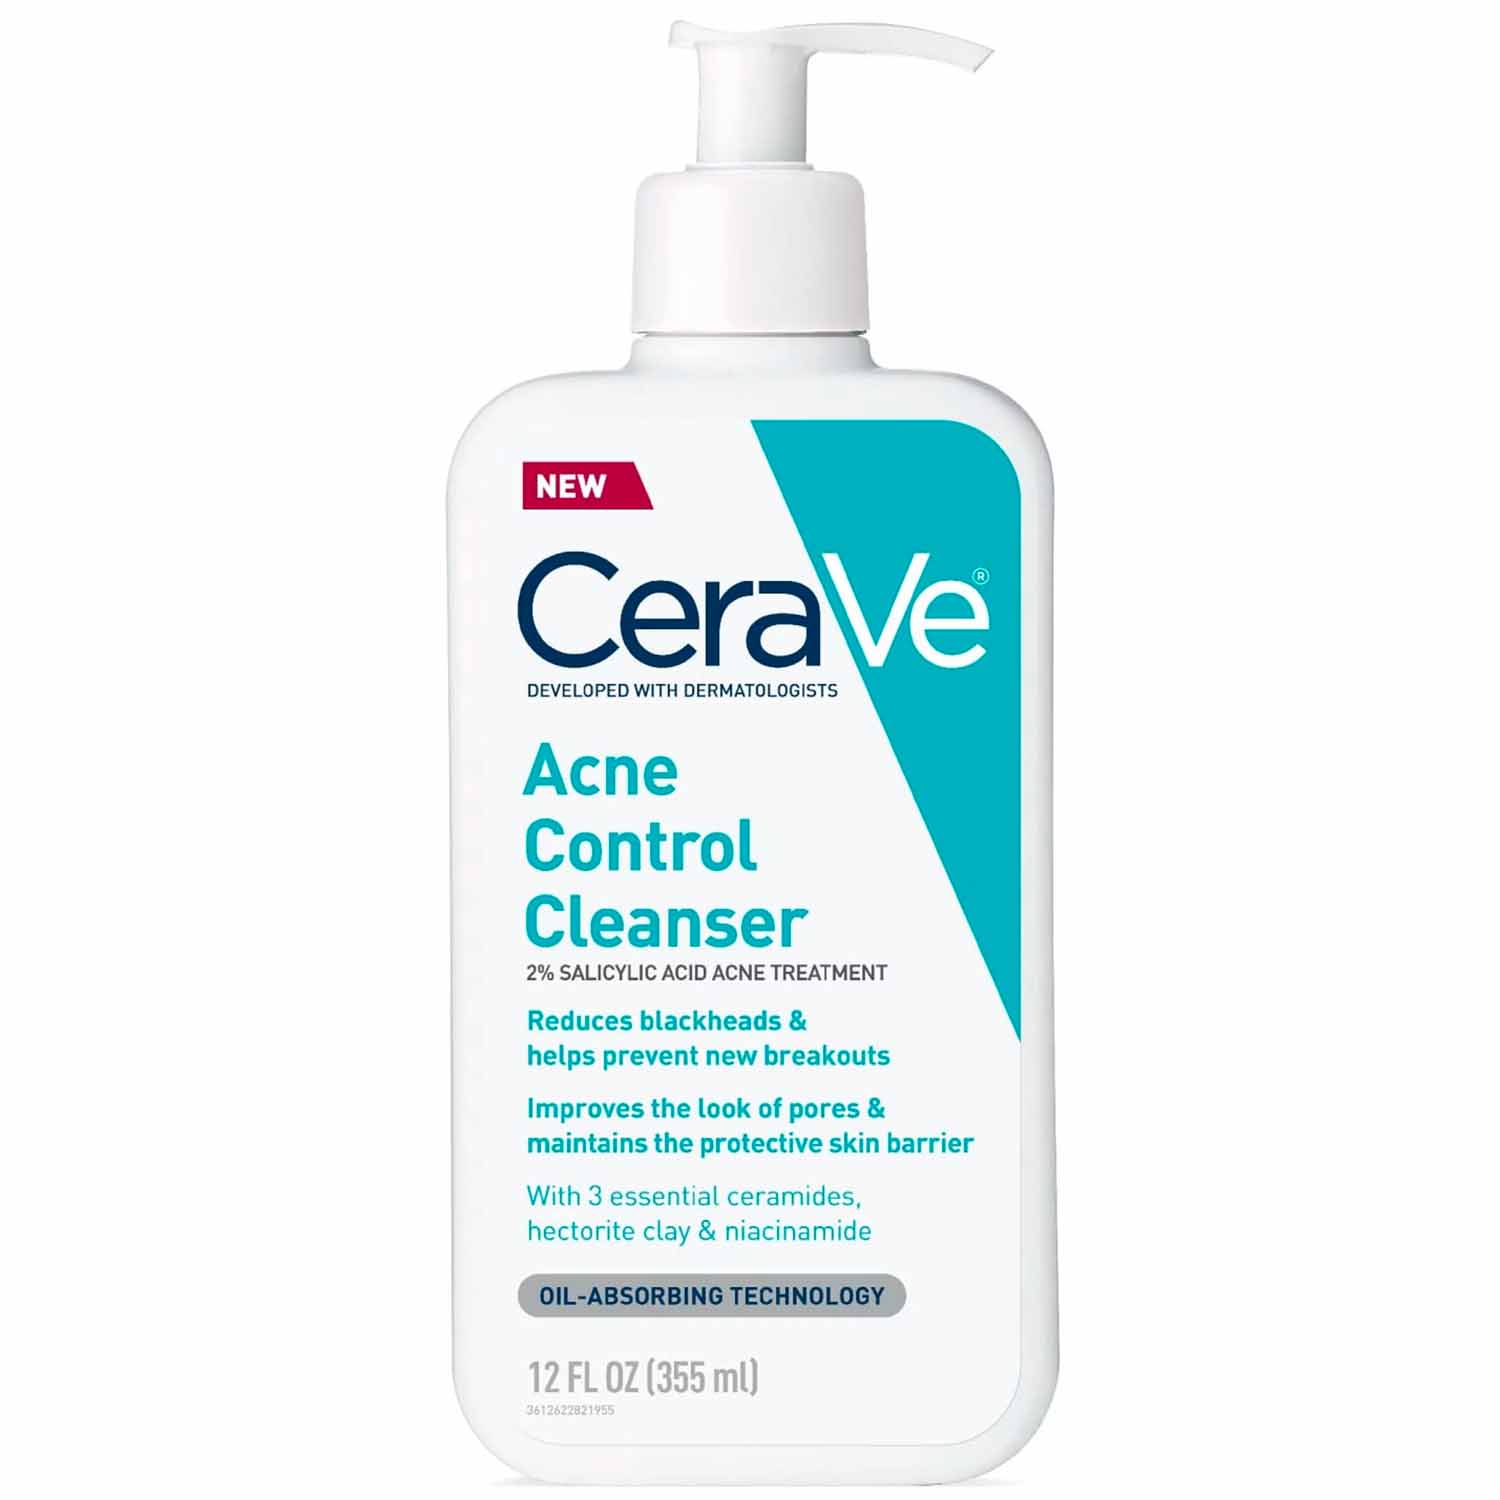 cerave acne control cleanser